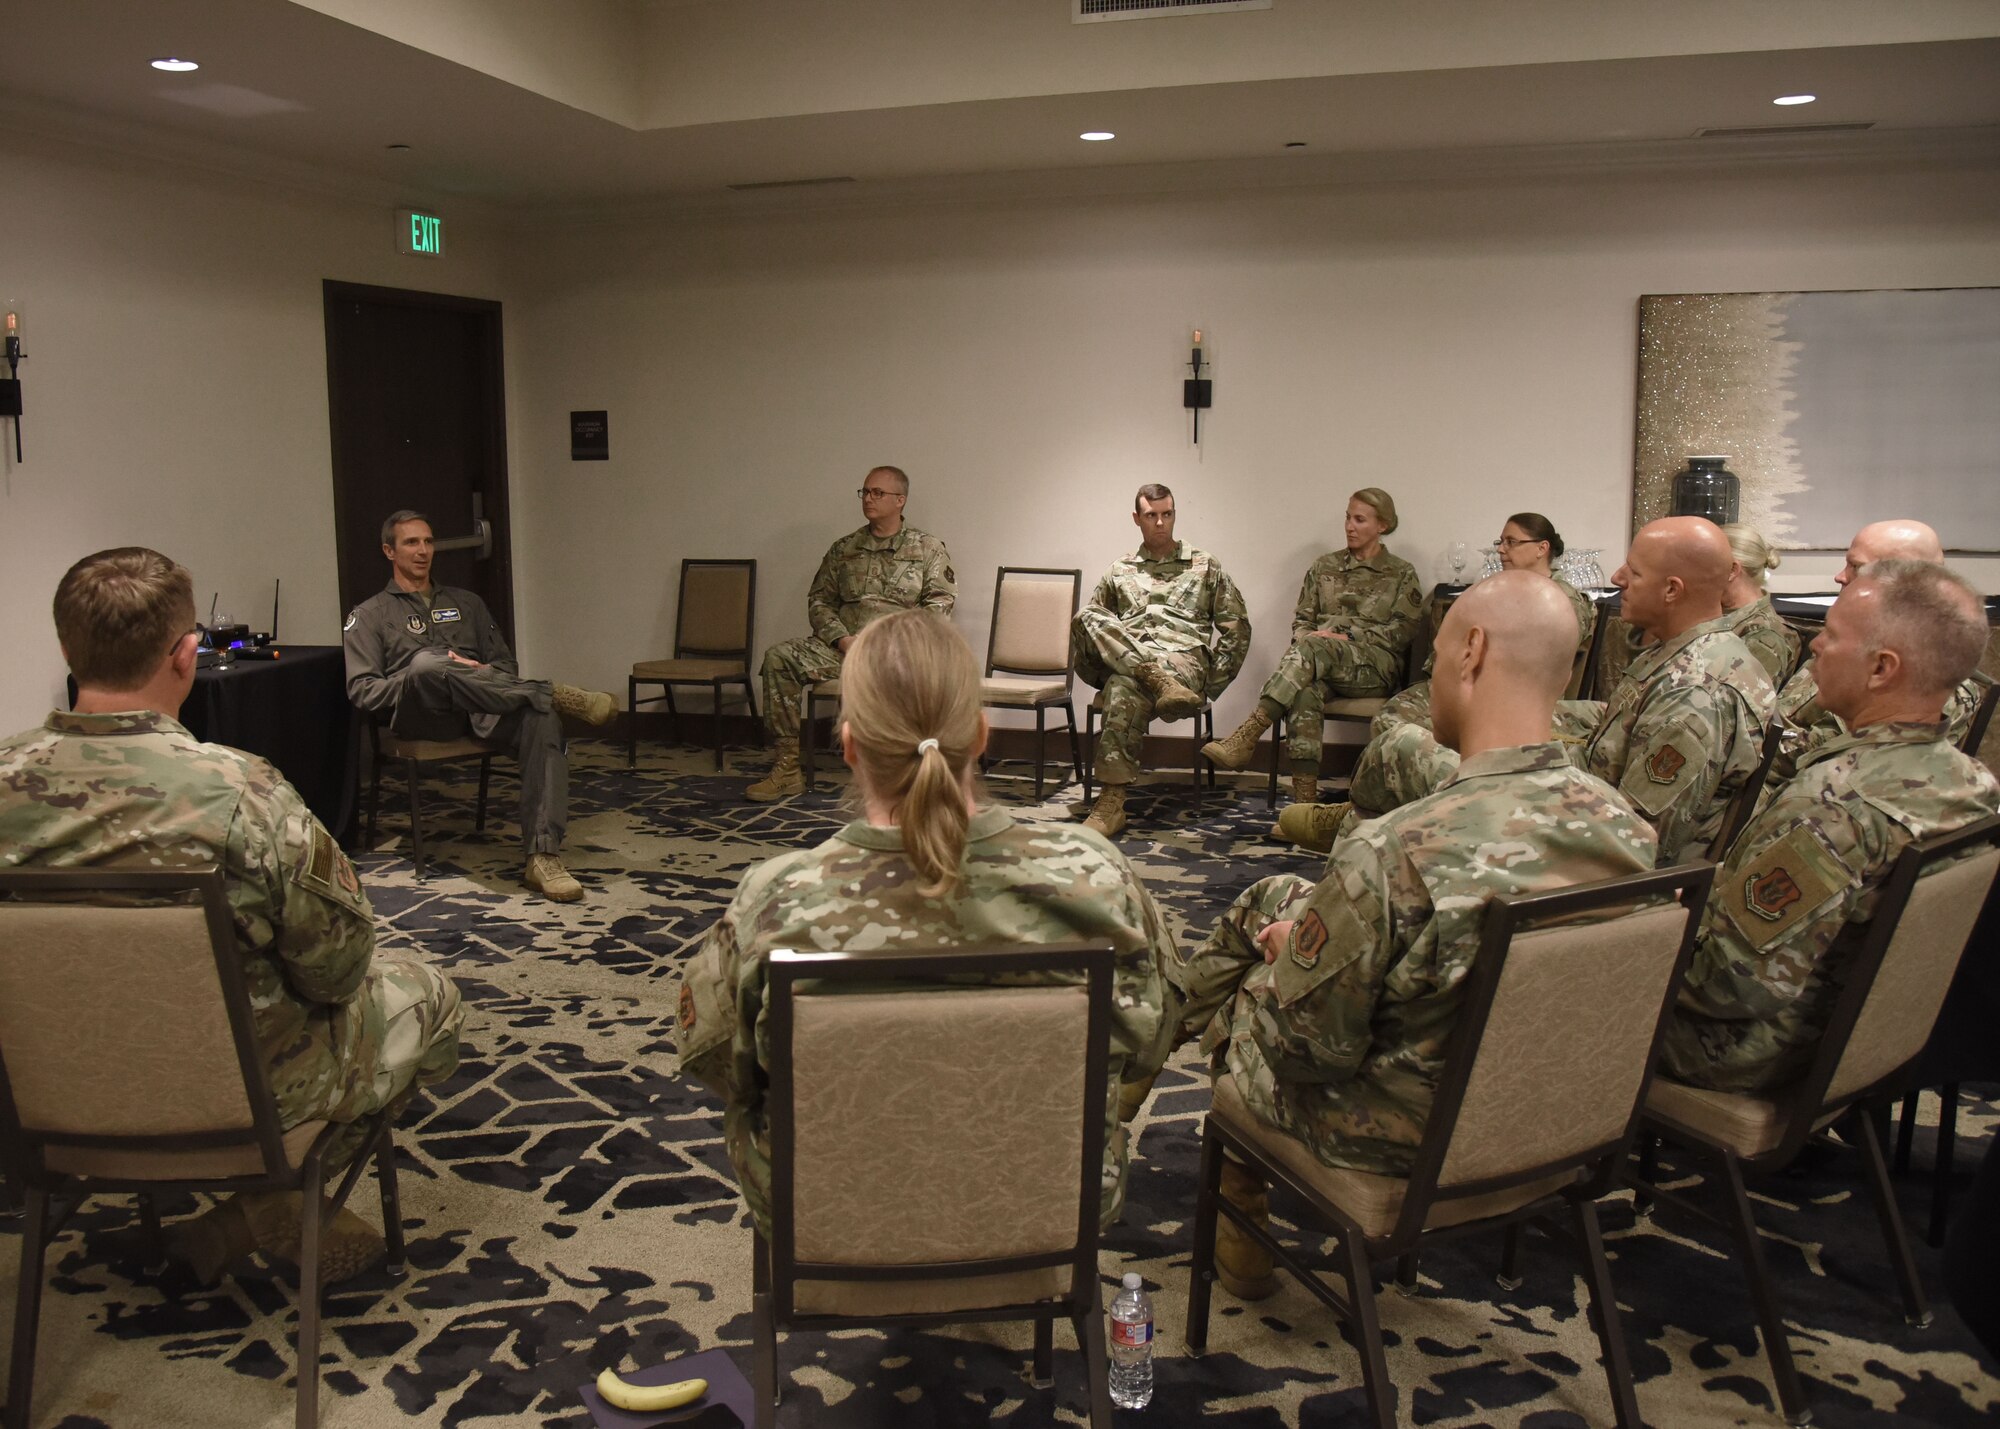 Maj. Gen. Bryan P. Radliff, 10th Air Force commander, addresses seniors leaders from the 11 subordinate wings and six direct reporting units during the Annual Commanders and Command Chiefs management and leadership review event held in Fort Worth, Texas, June 20-23. Radliff sat down with command chiefs and senior leaders to hear specific challenges encountered in their units. (U.S. Air Force photo by 2nd Lt. Mary A. Andom)